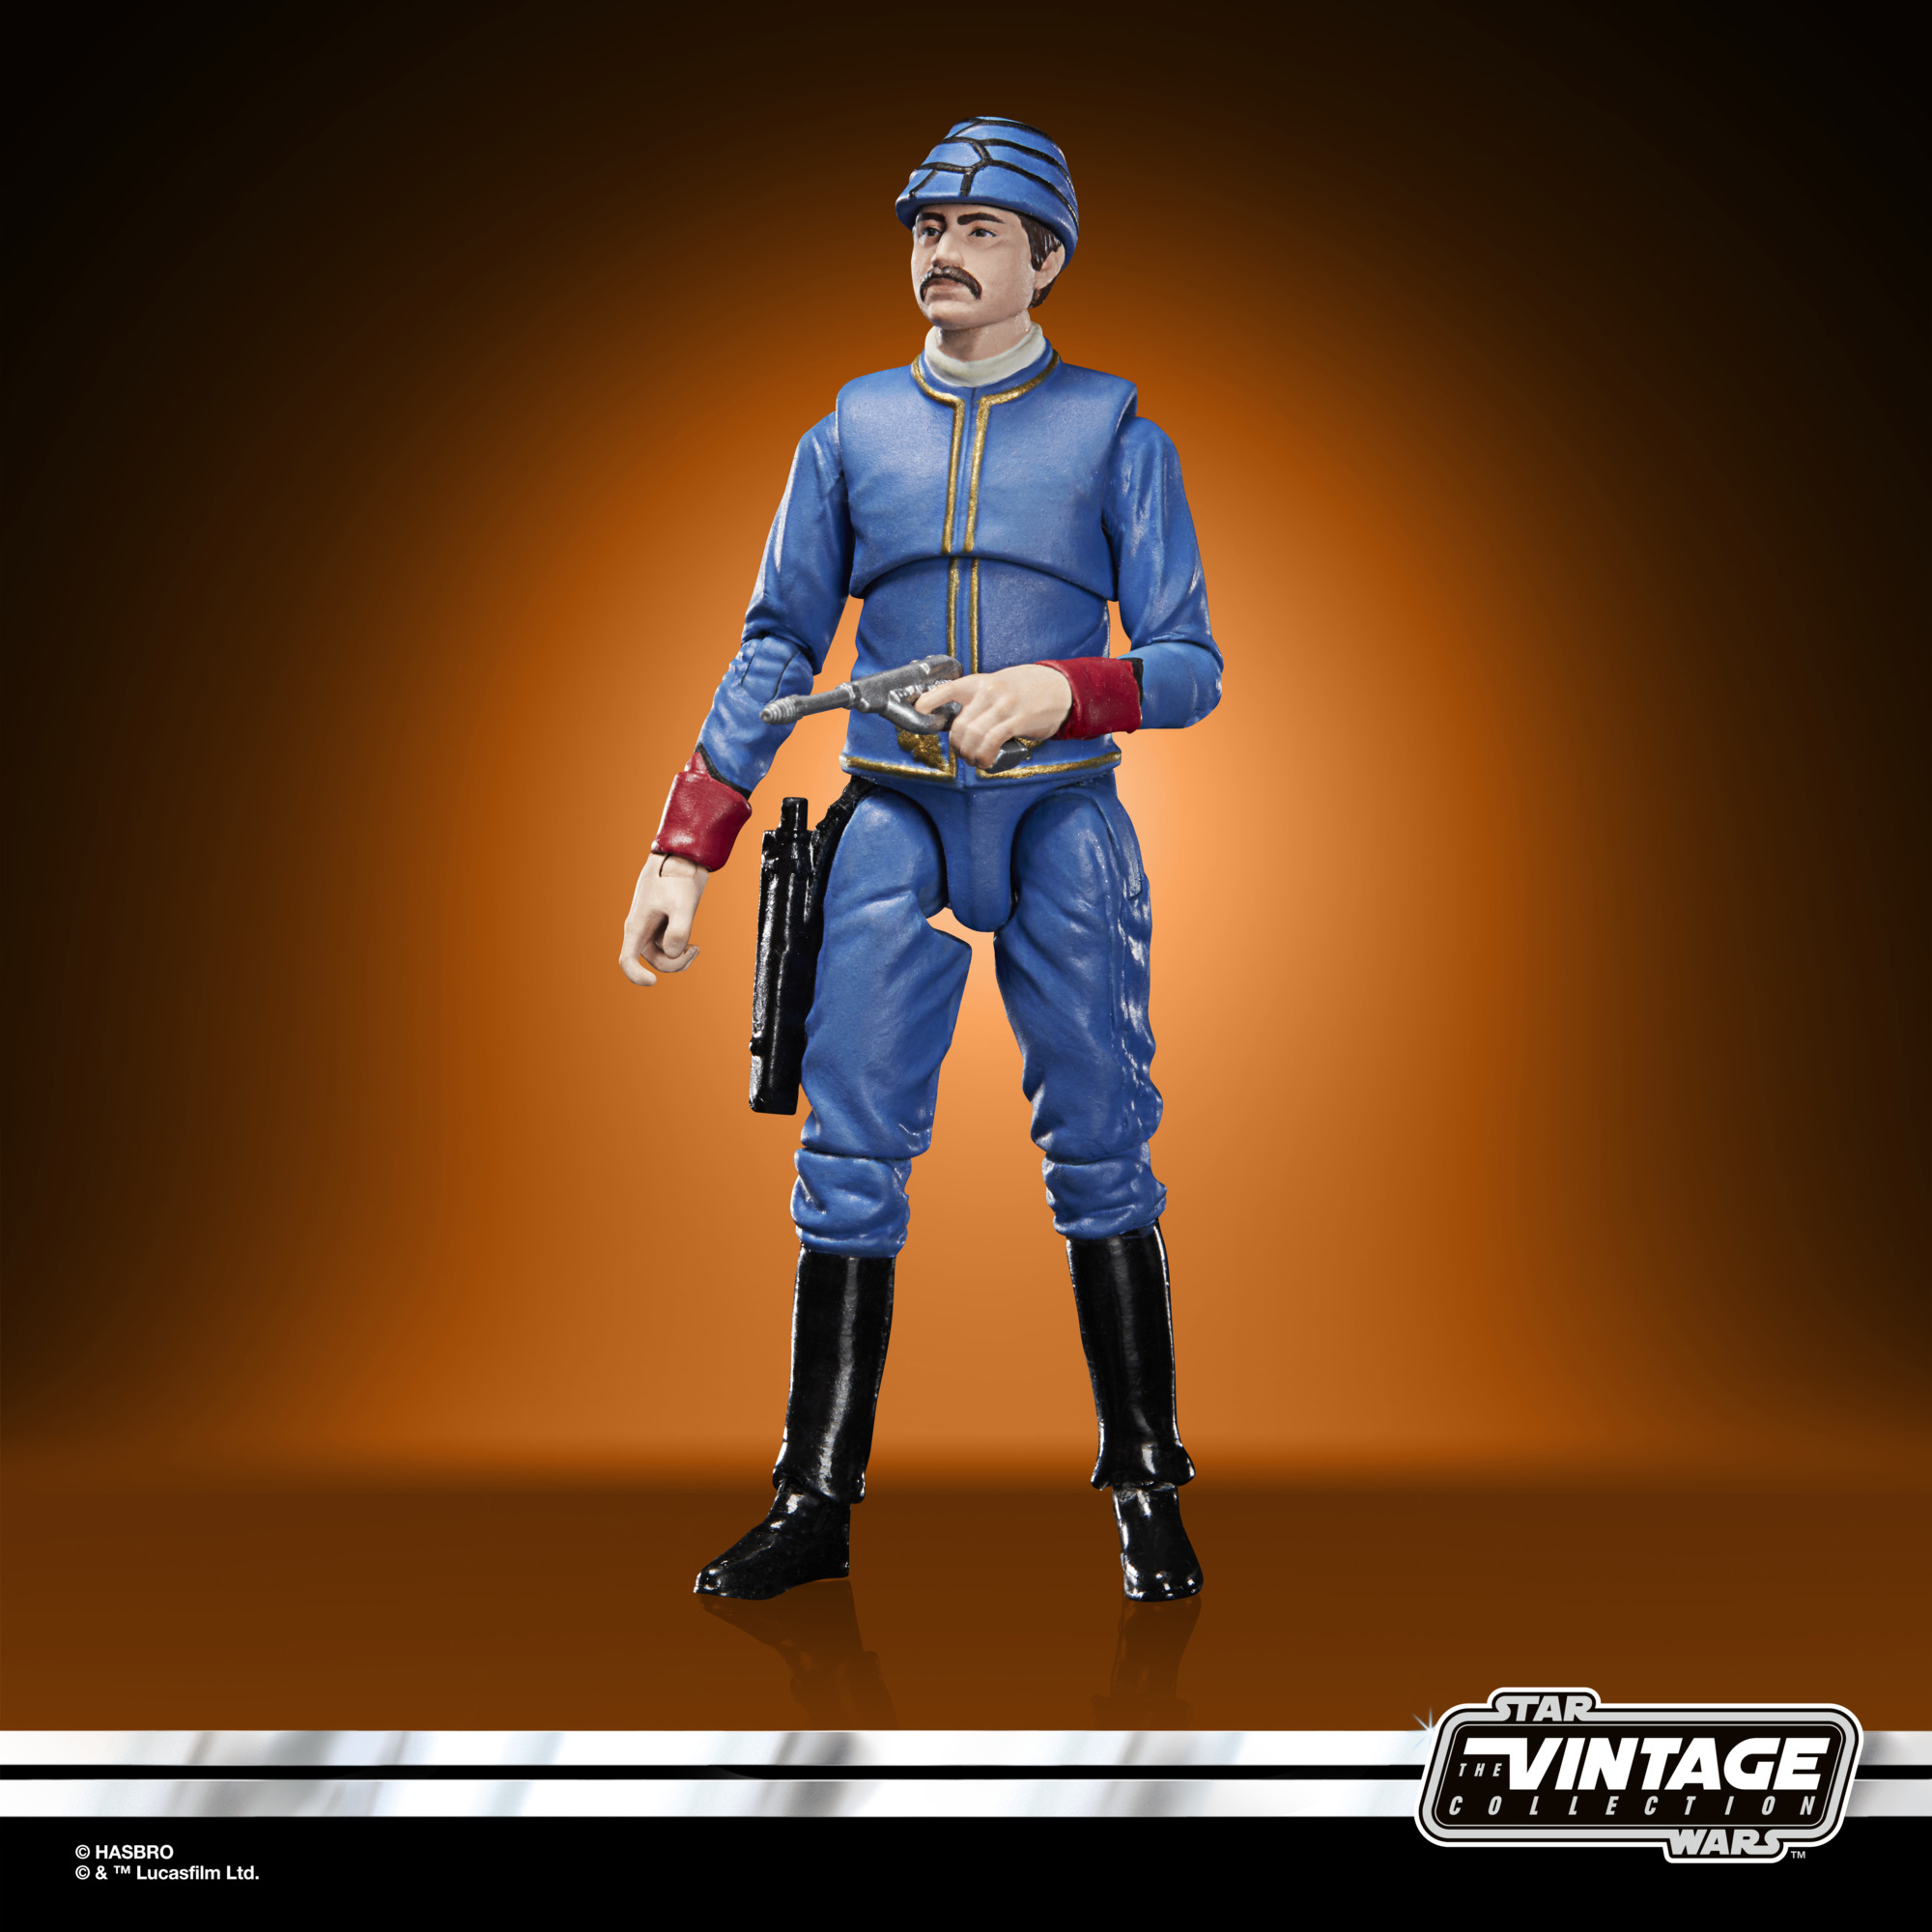 Star Wars The Vintage Collection Bespin Security Guard (Helder Spinoza) F55735L61 5010993968305